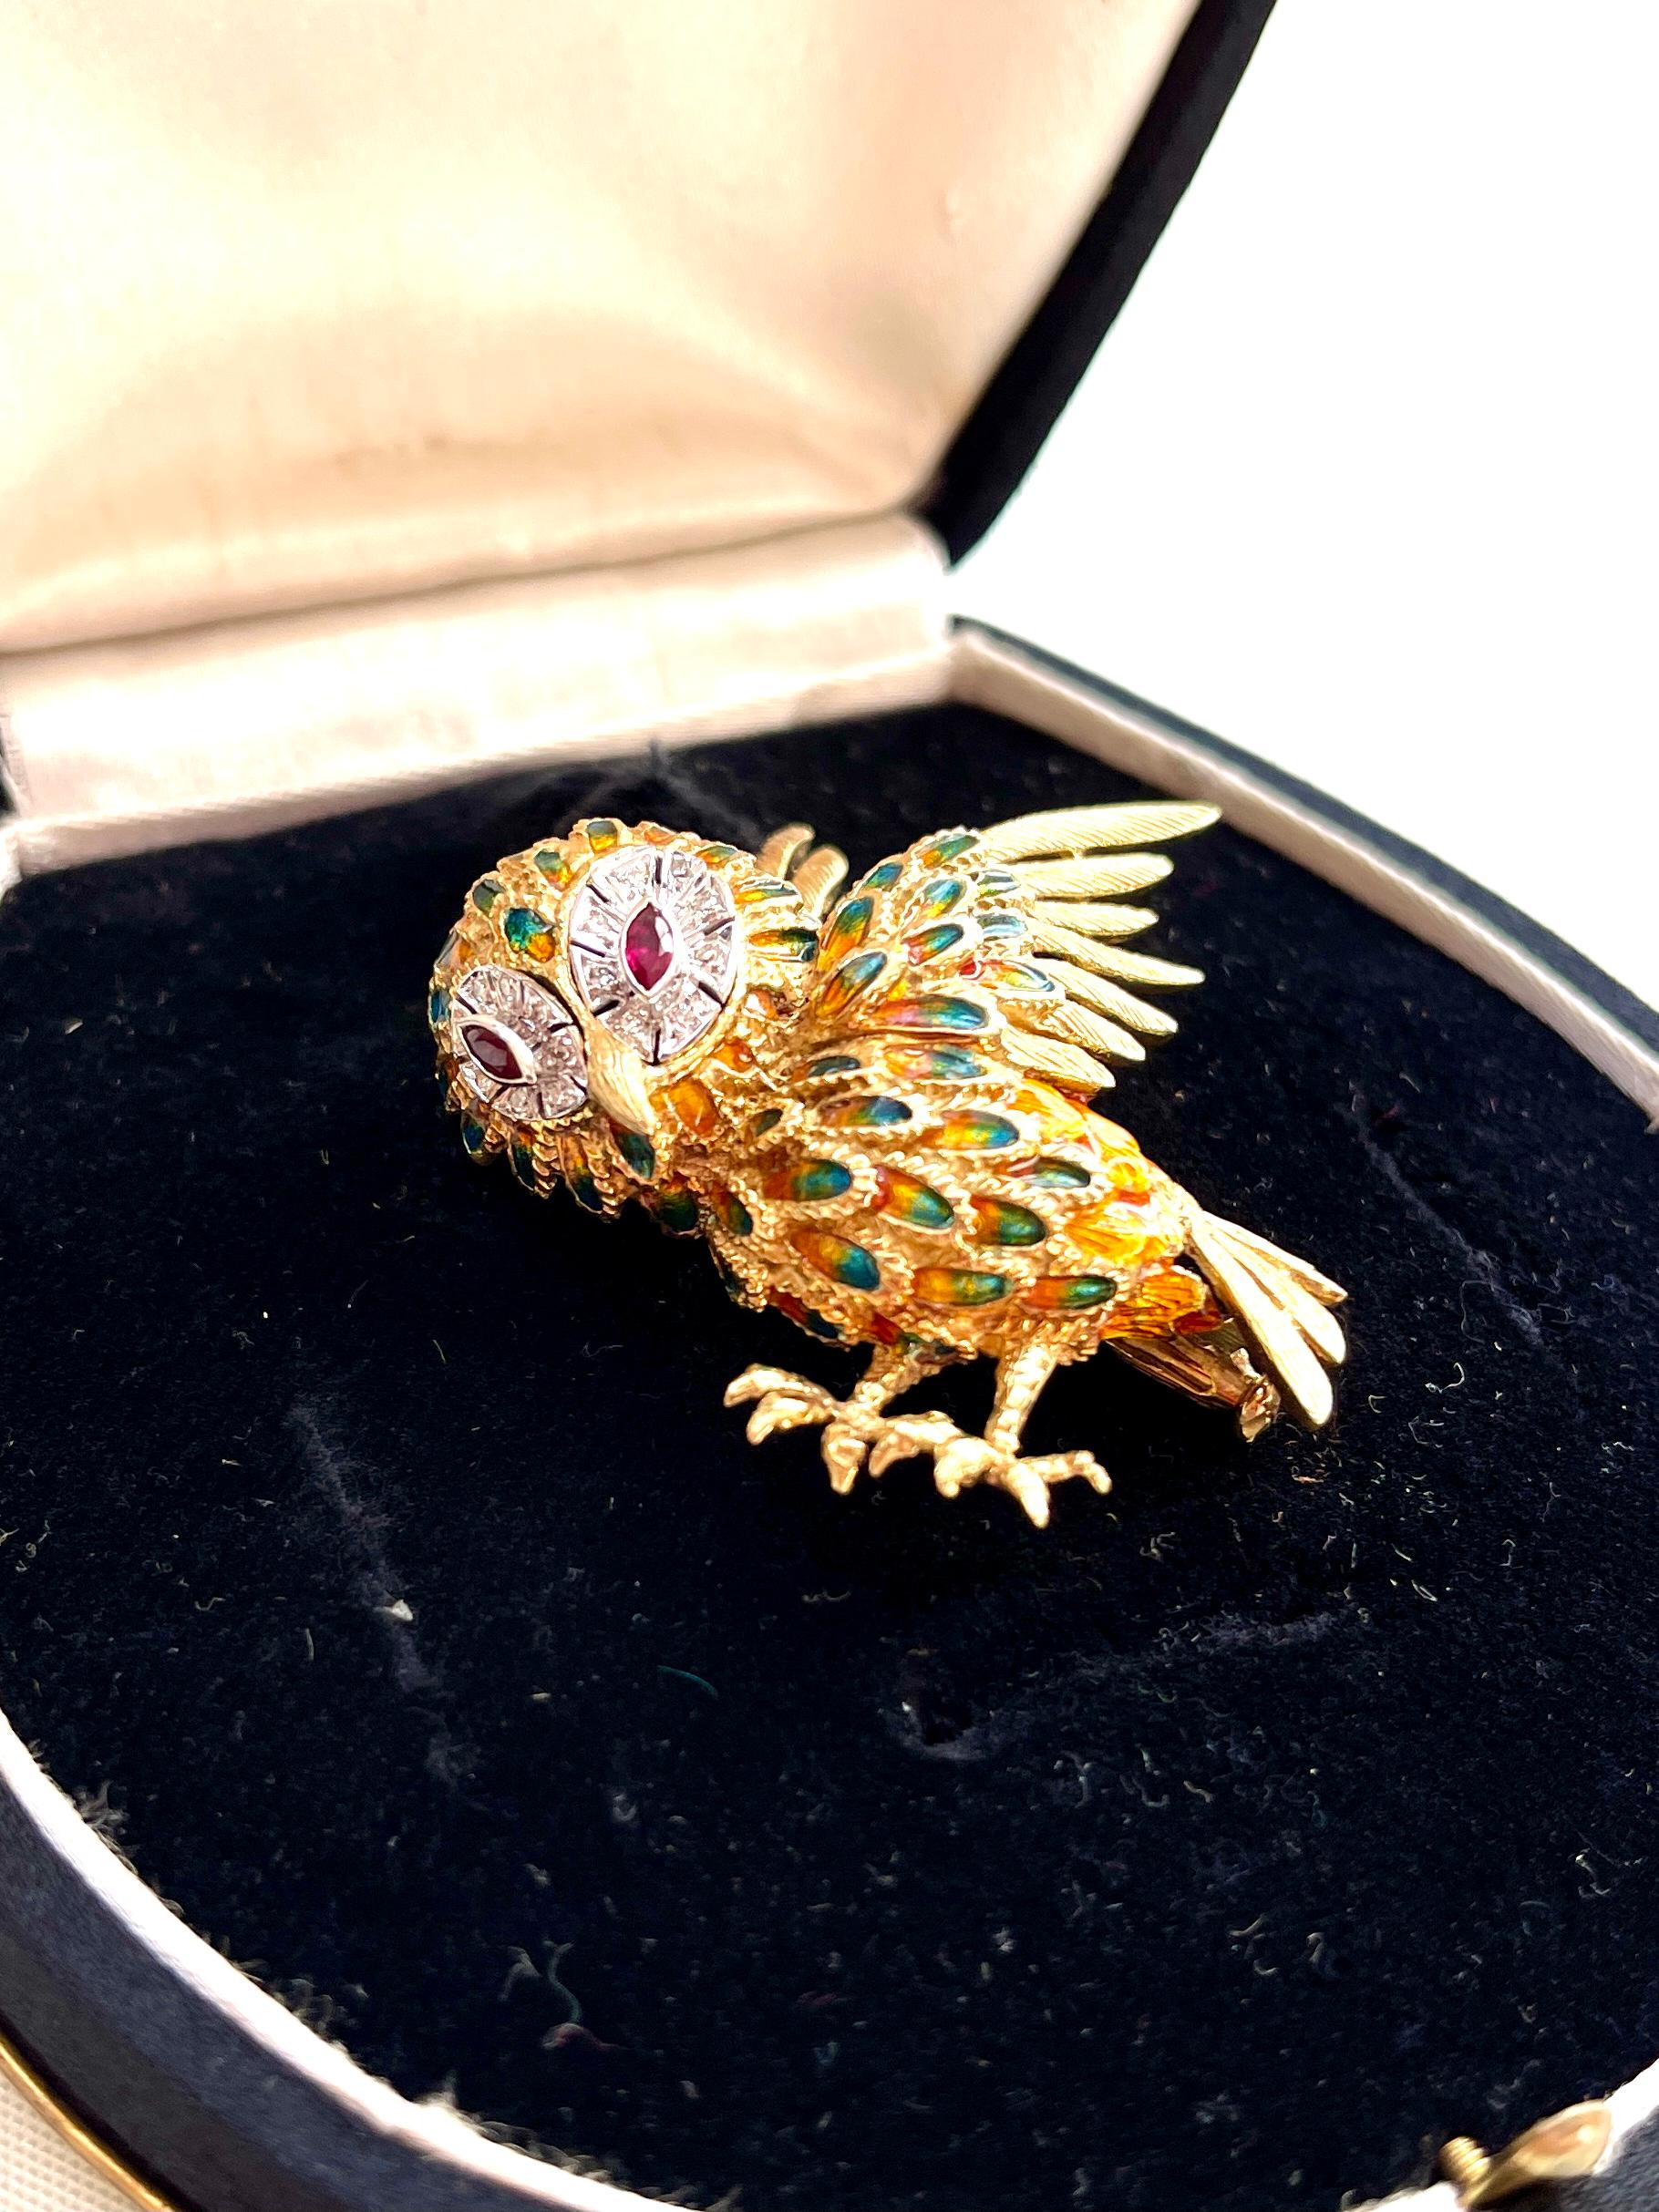 A Magnificent Retro Brooch, representing an Owl / Bird, in the style of Van Cleef and Arpels. 
Perfect for both everyday use, or a magnificent dinner party. 
The Owl is one of the highest symbols to express Wisdom, Knowledge and Femininity.   

The